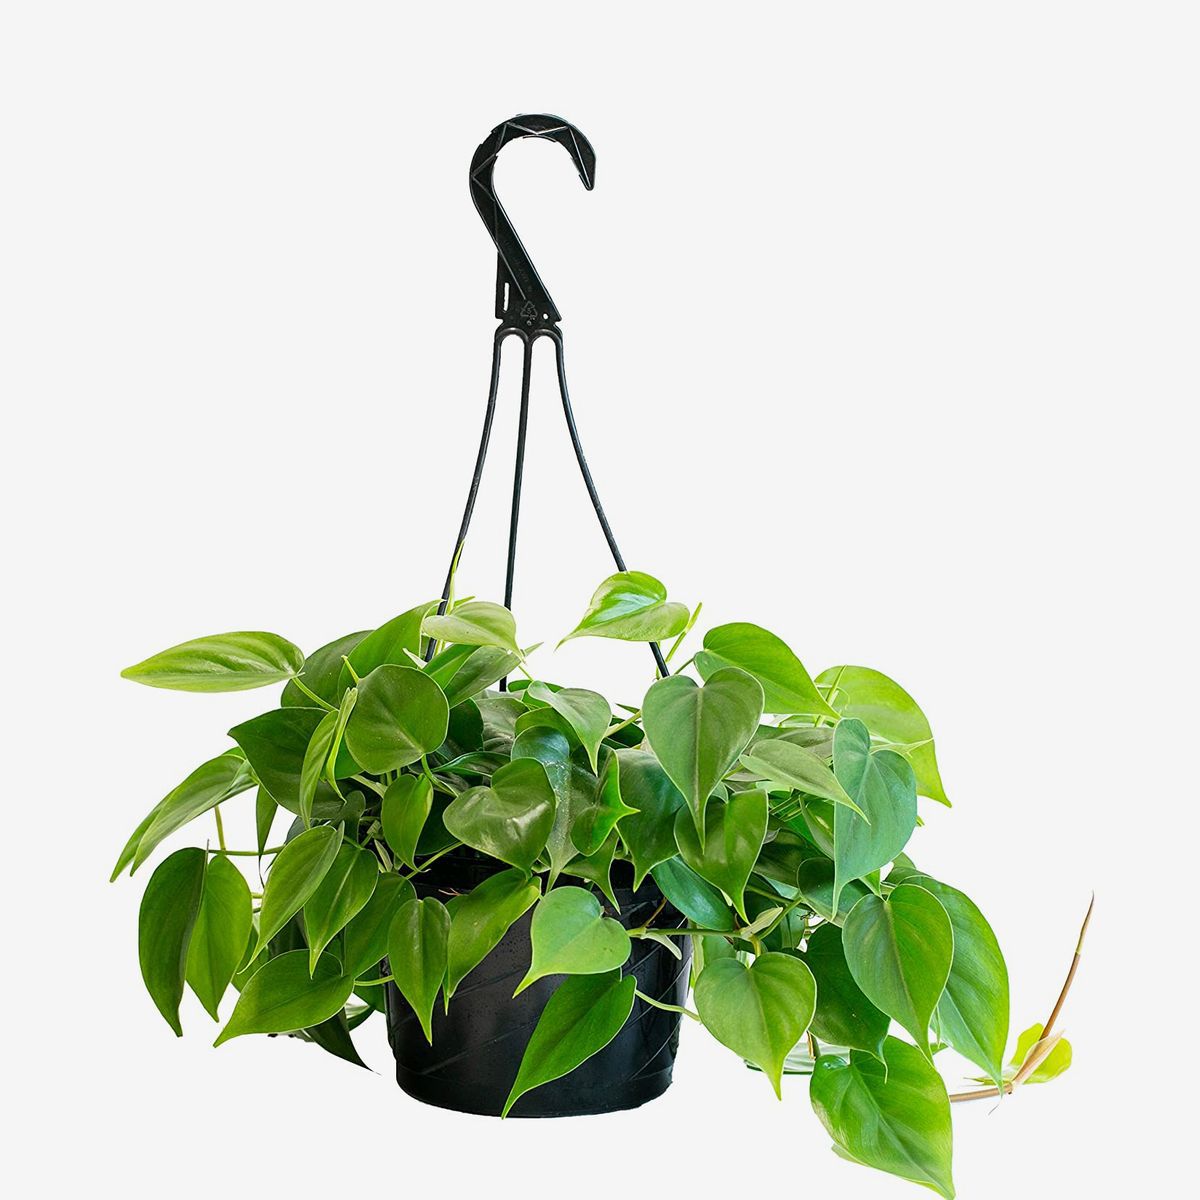 Hanging planter with trailing heart-shaped leaves.